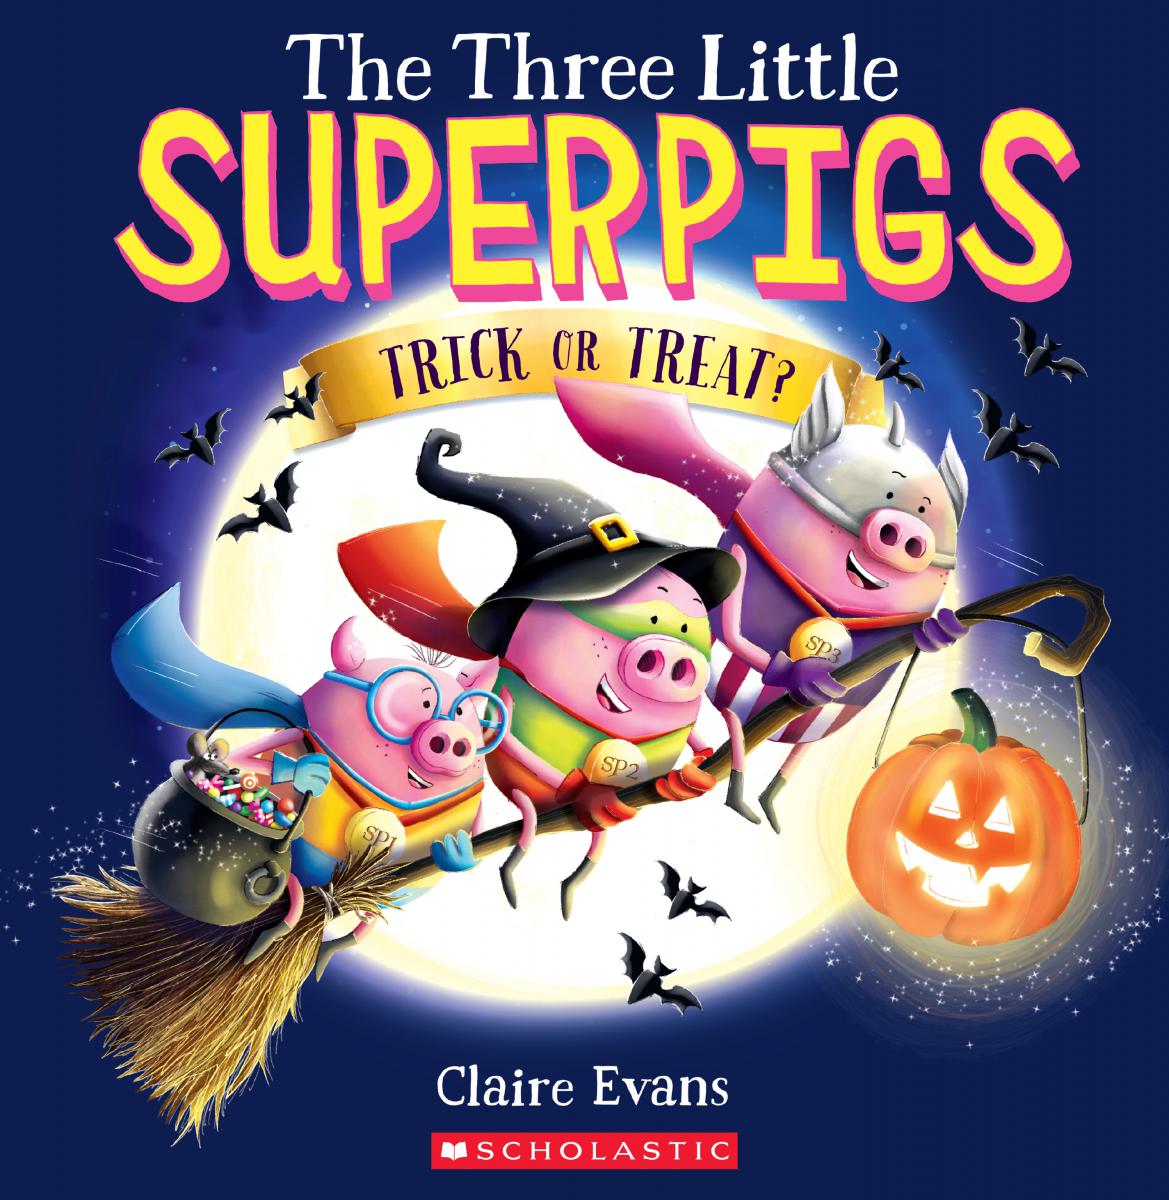 The Three Little Superpigs: Trick or Treat? | Evans, Claire